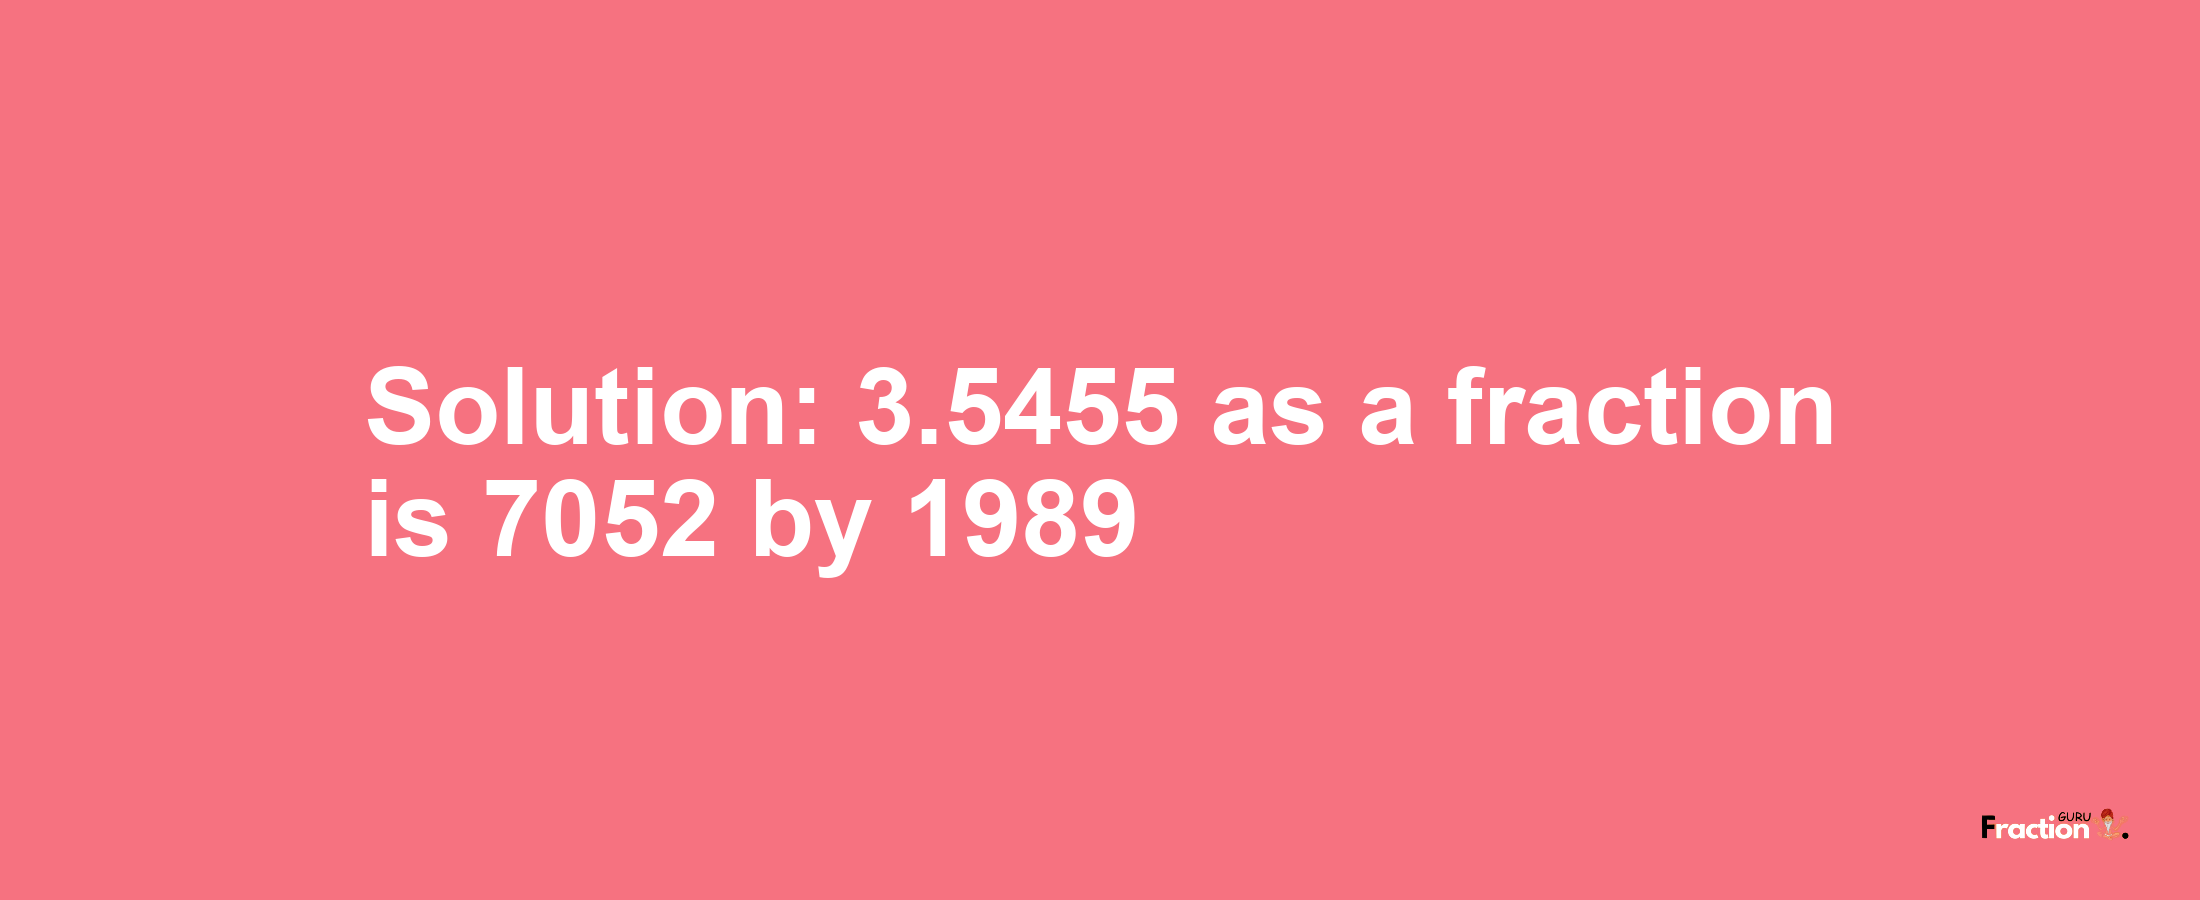 Solution:3.5455 as a fraction is 7052/1989